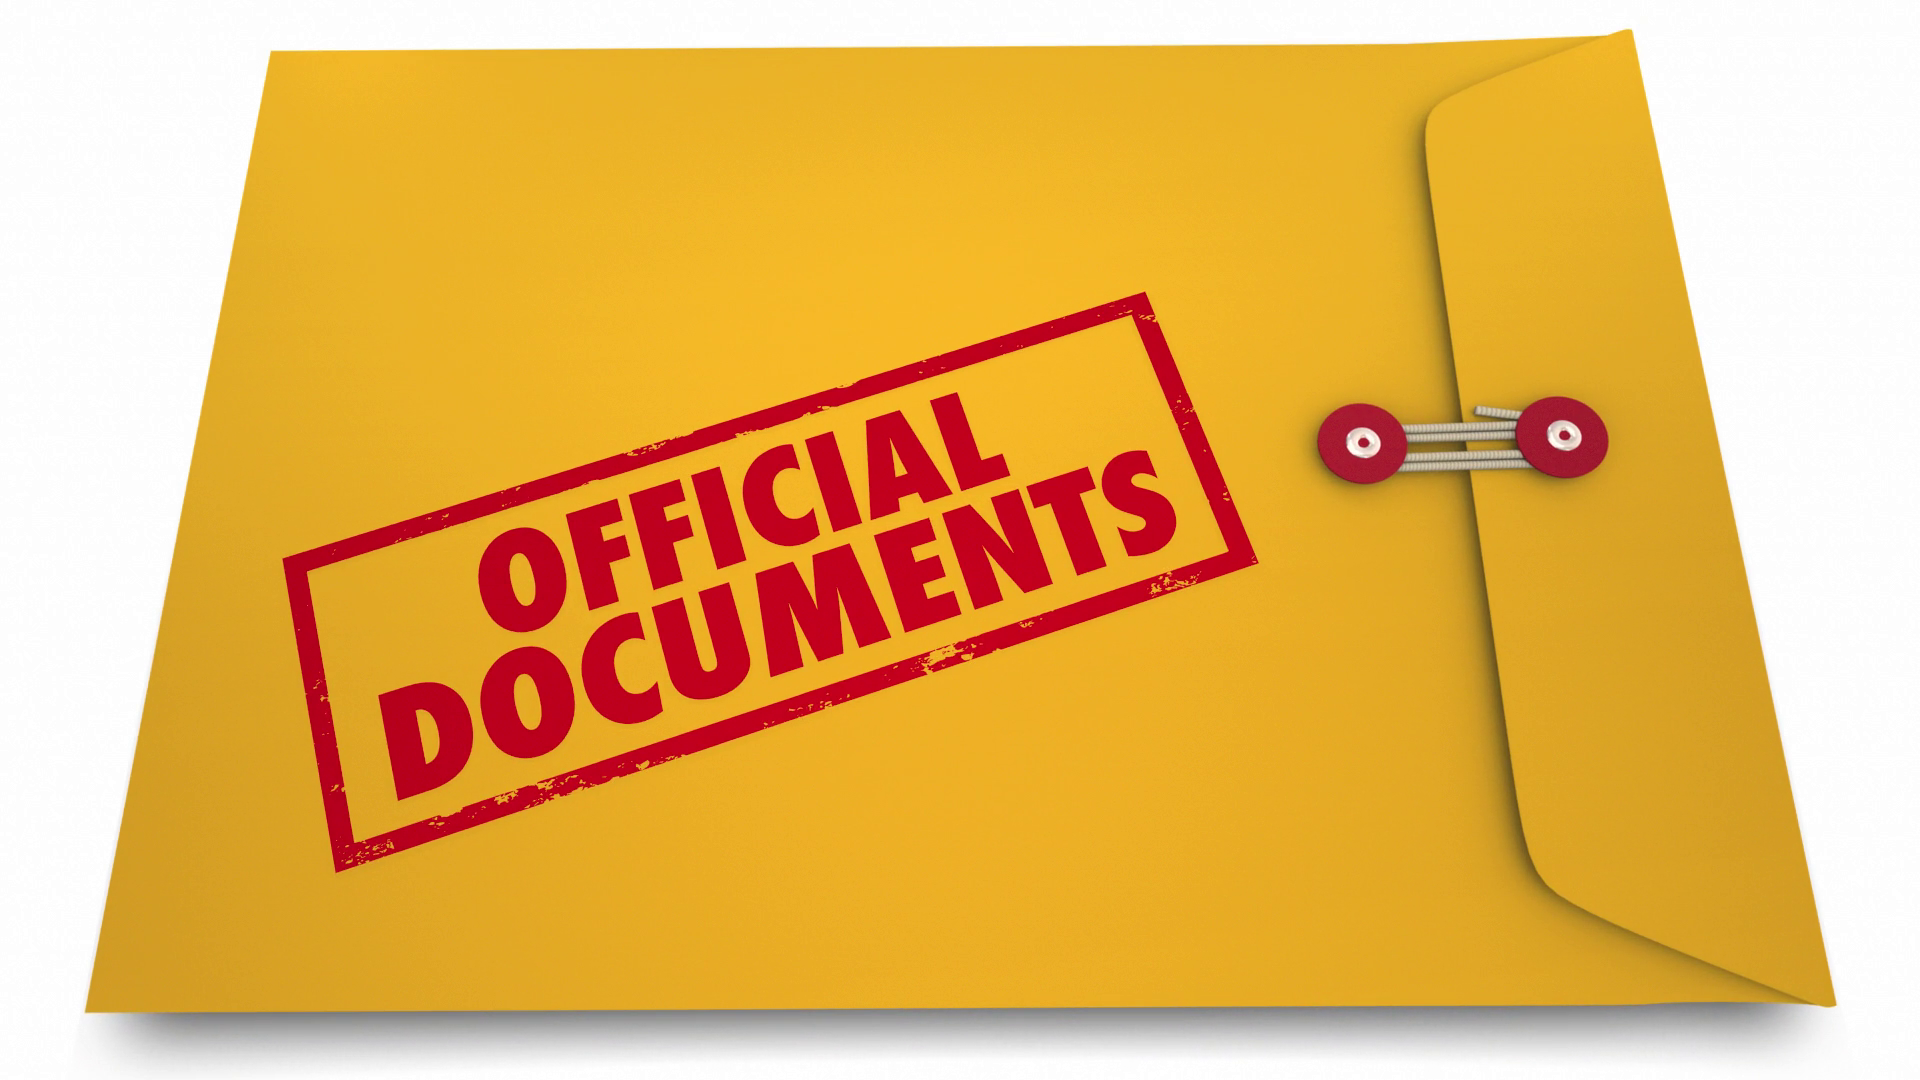 A yellow folder with a red stamp that says 'Official Documents' with a rubber band around it.